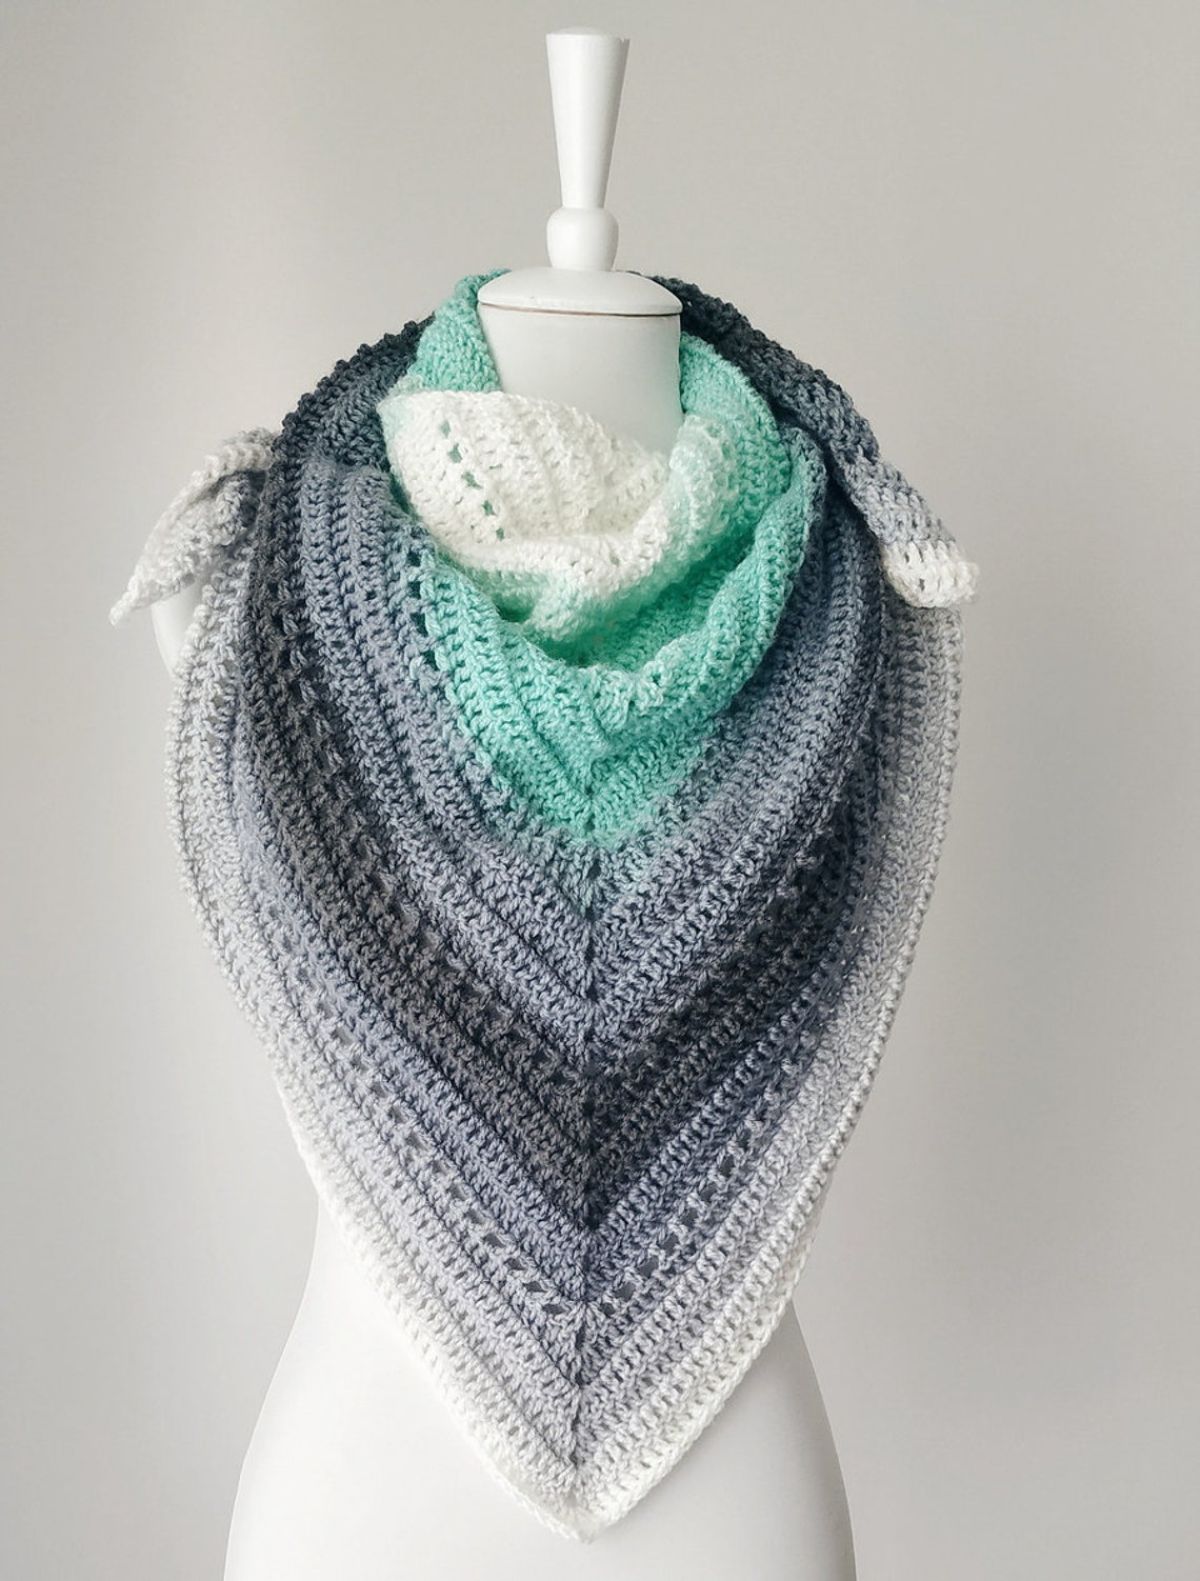  White, grey, and green crochet skein shawl with diagonal lines for each color wrapped around the mannequin's neck on a white background.